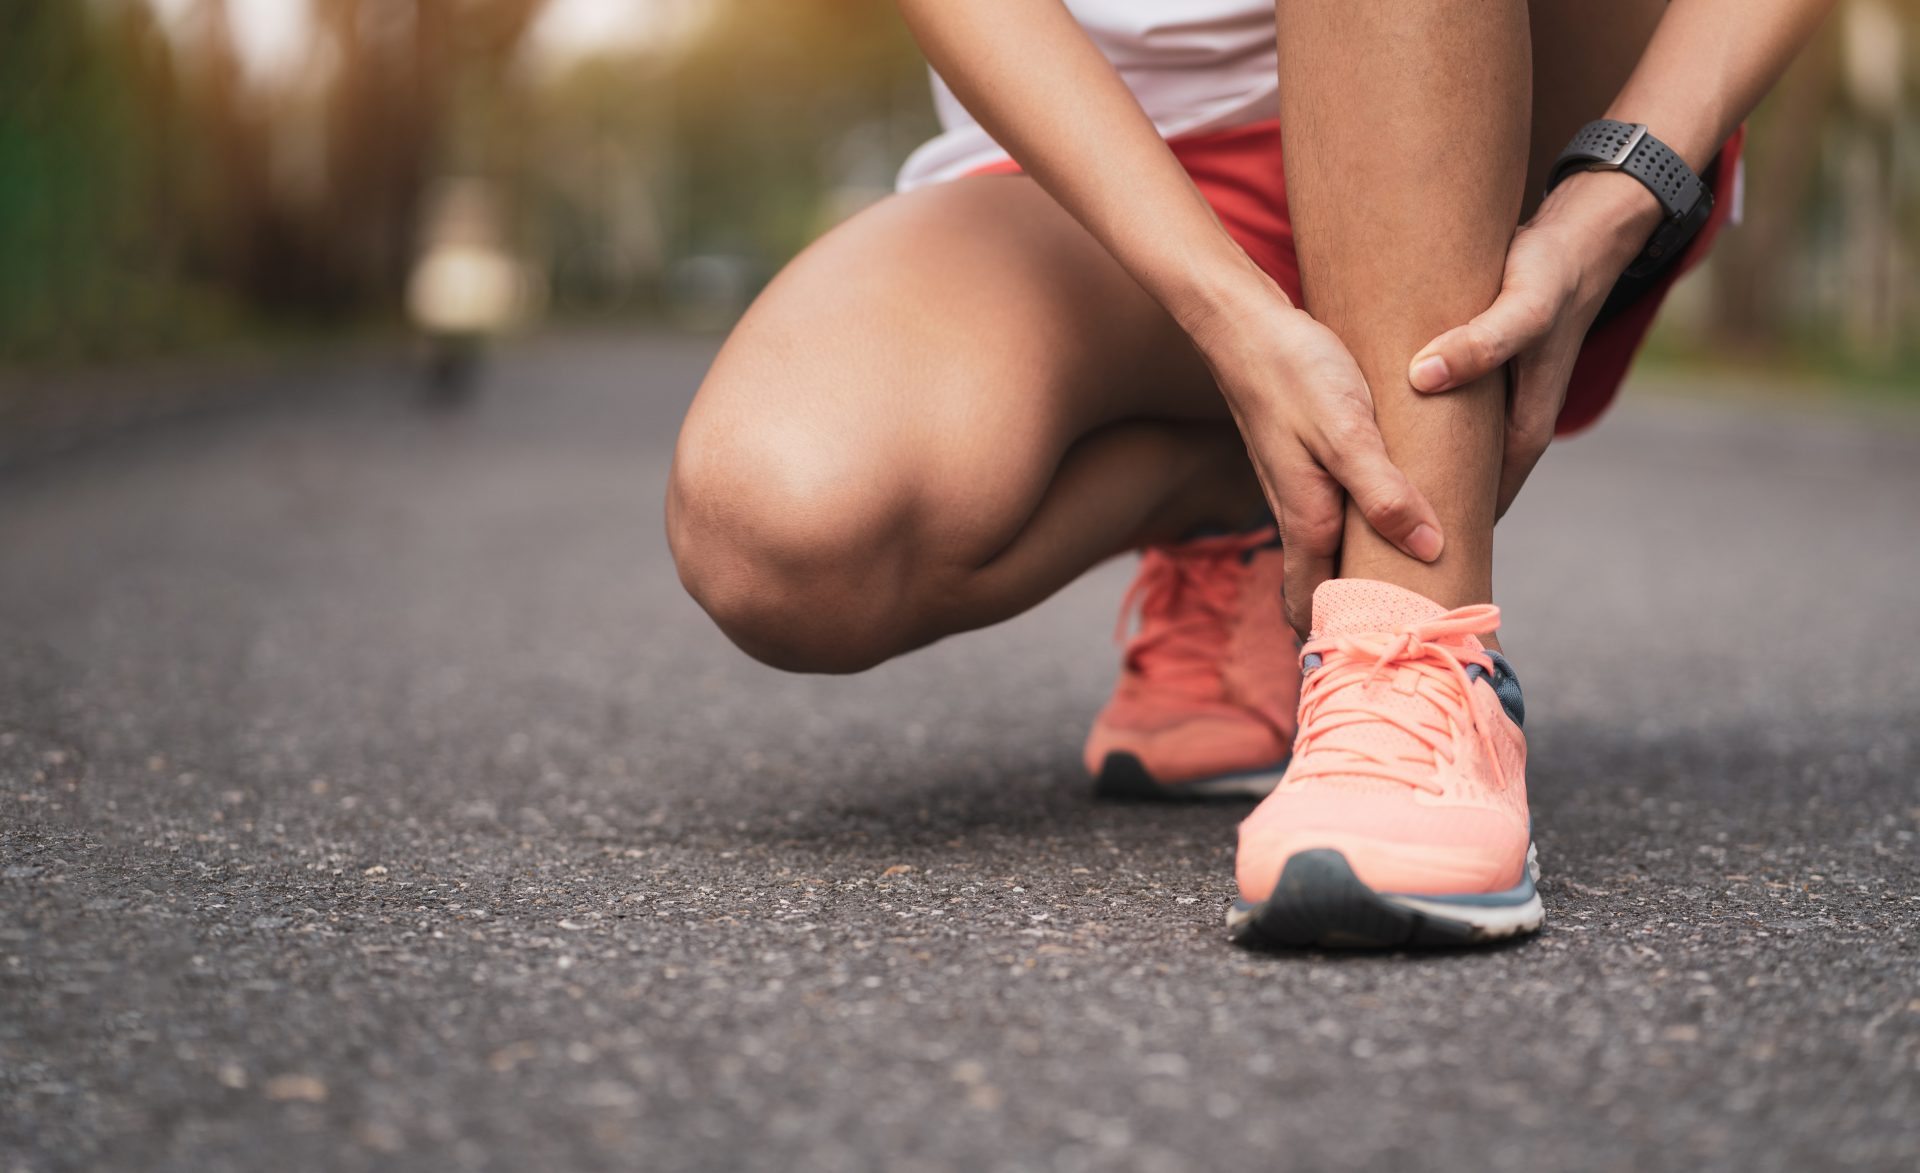 Tib raises are a great exercise to help runners avoid shin splints